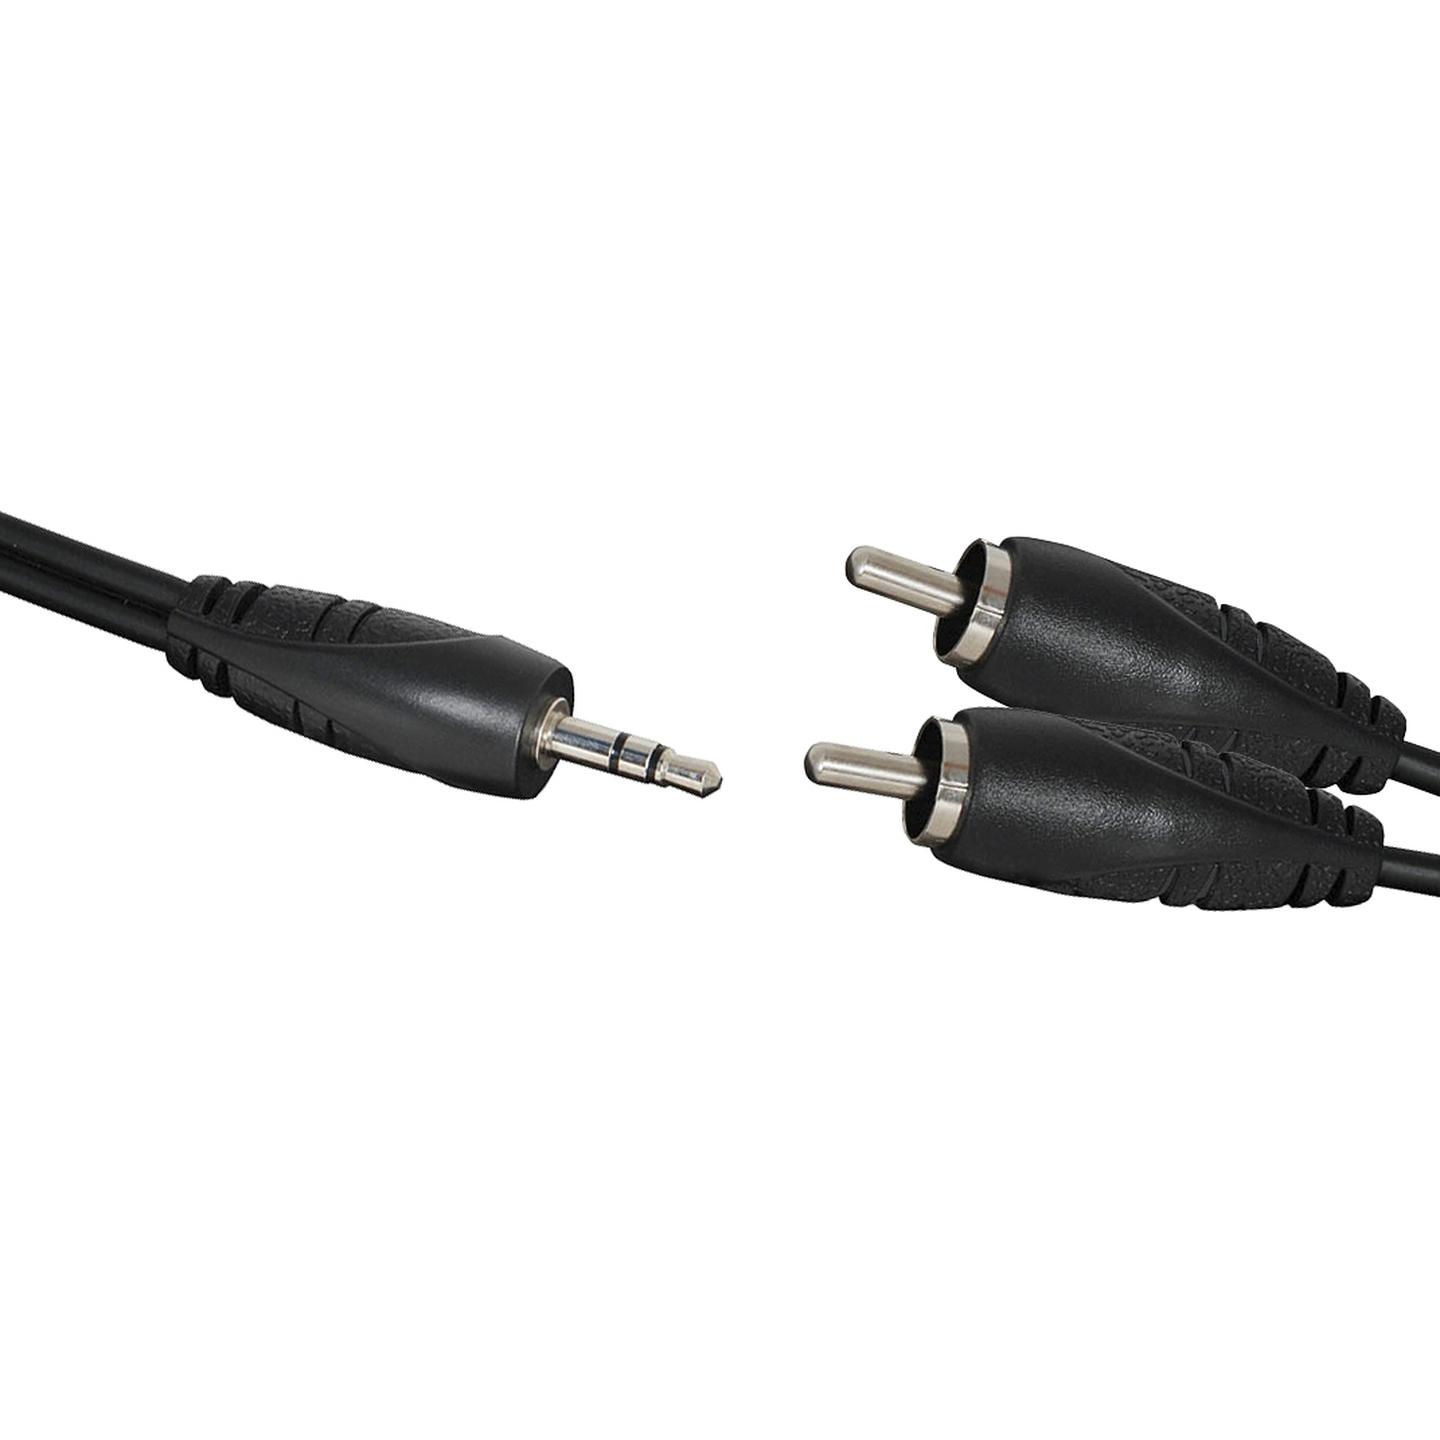 3.5mm Stereo Plug to 2 x RCA Plugs Audio Cable - 3m